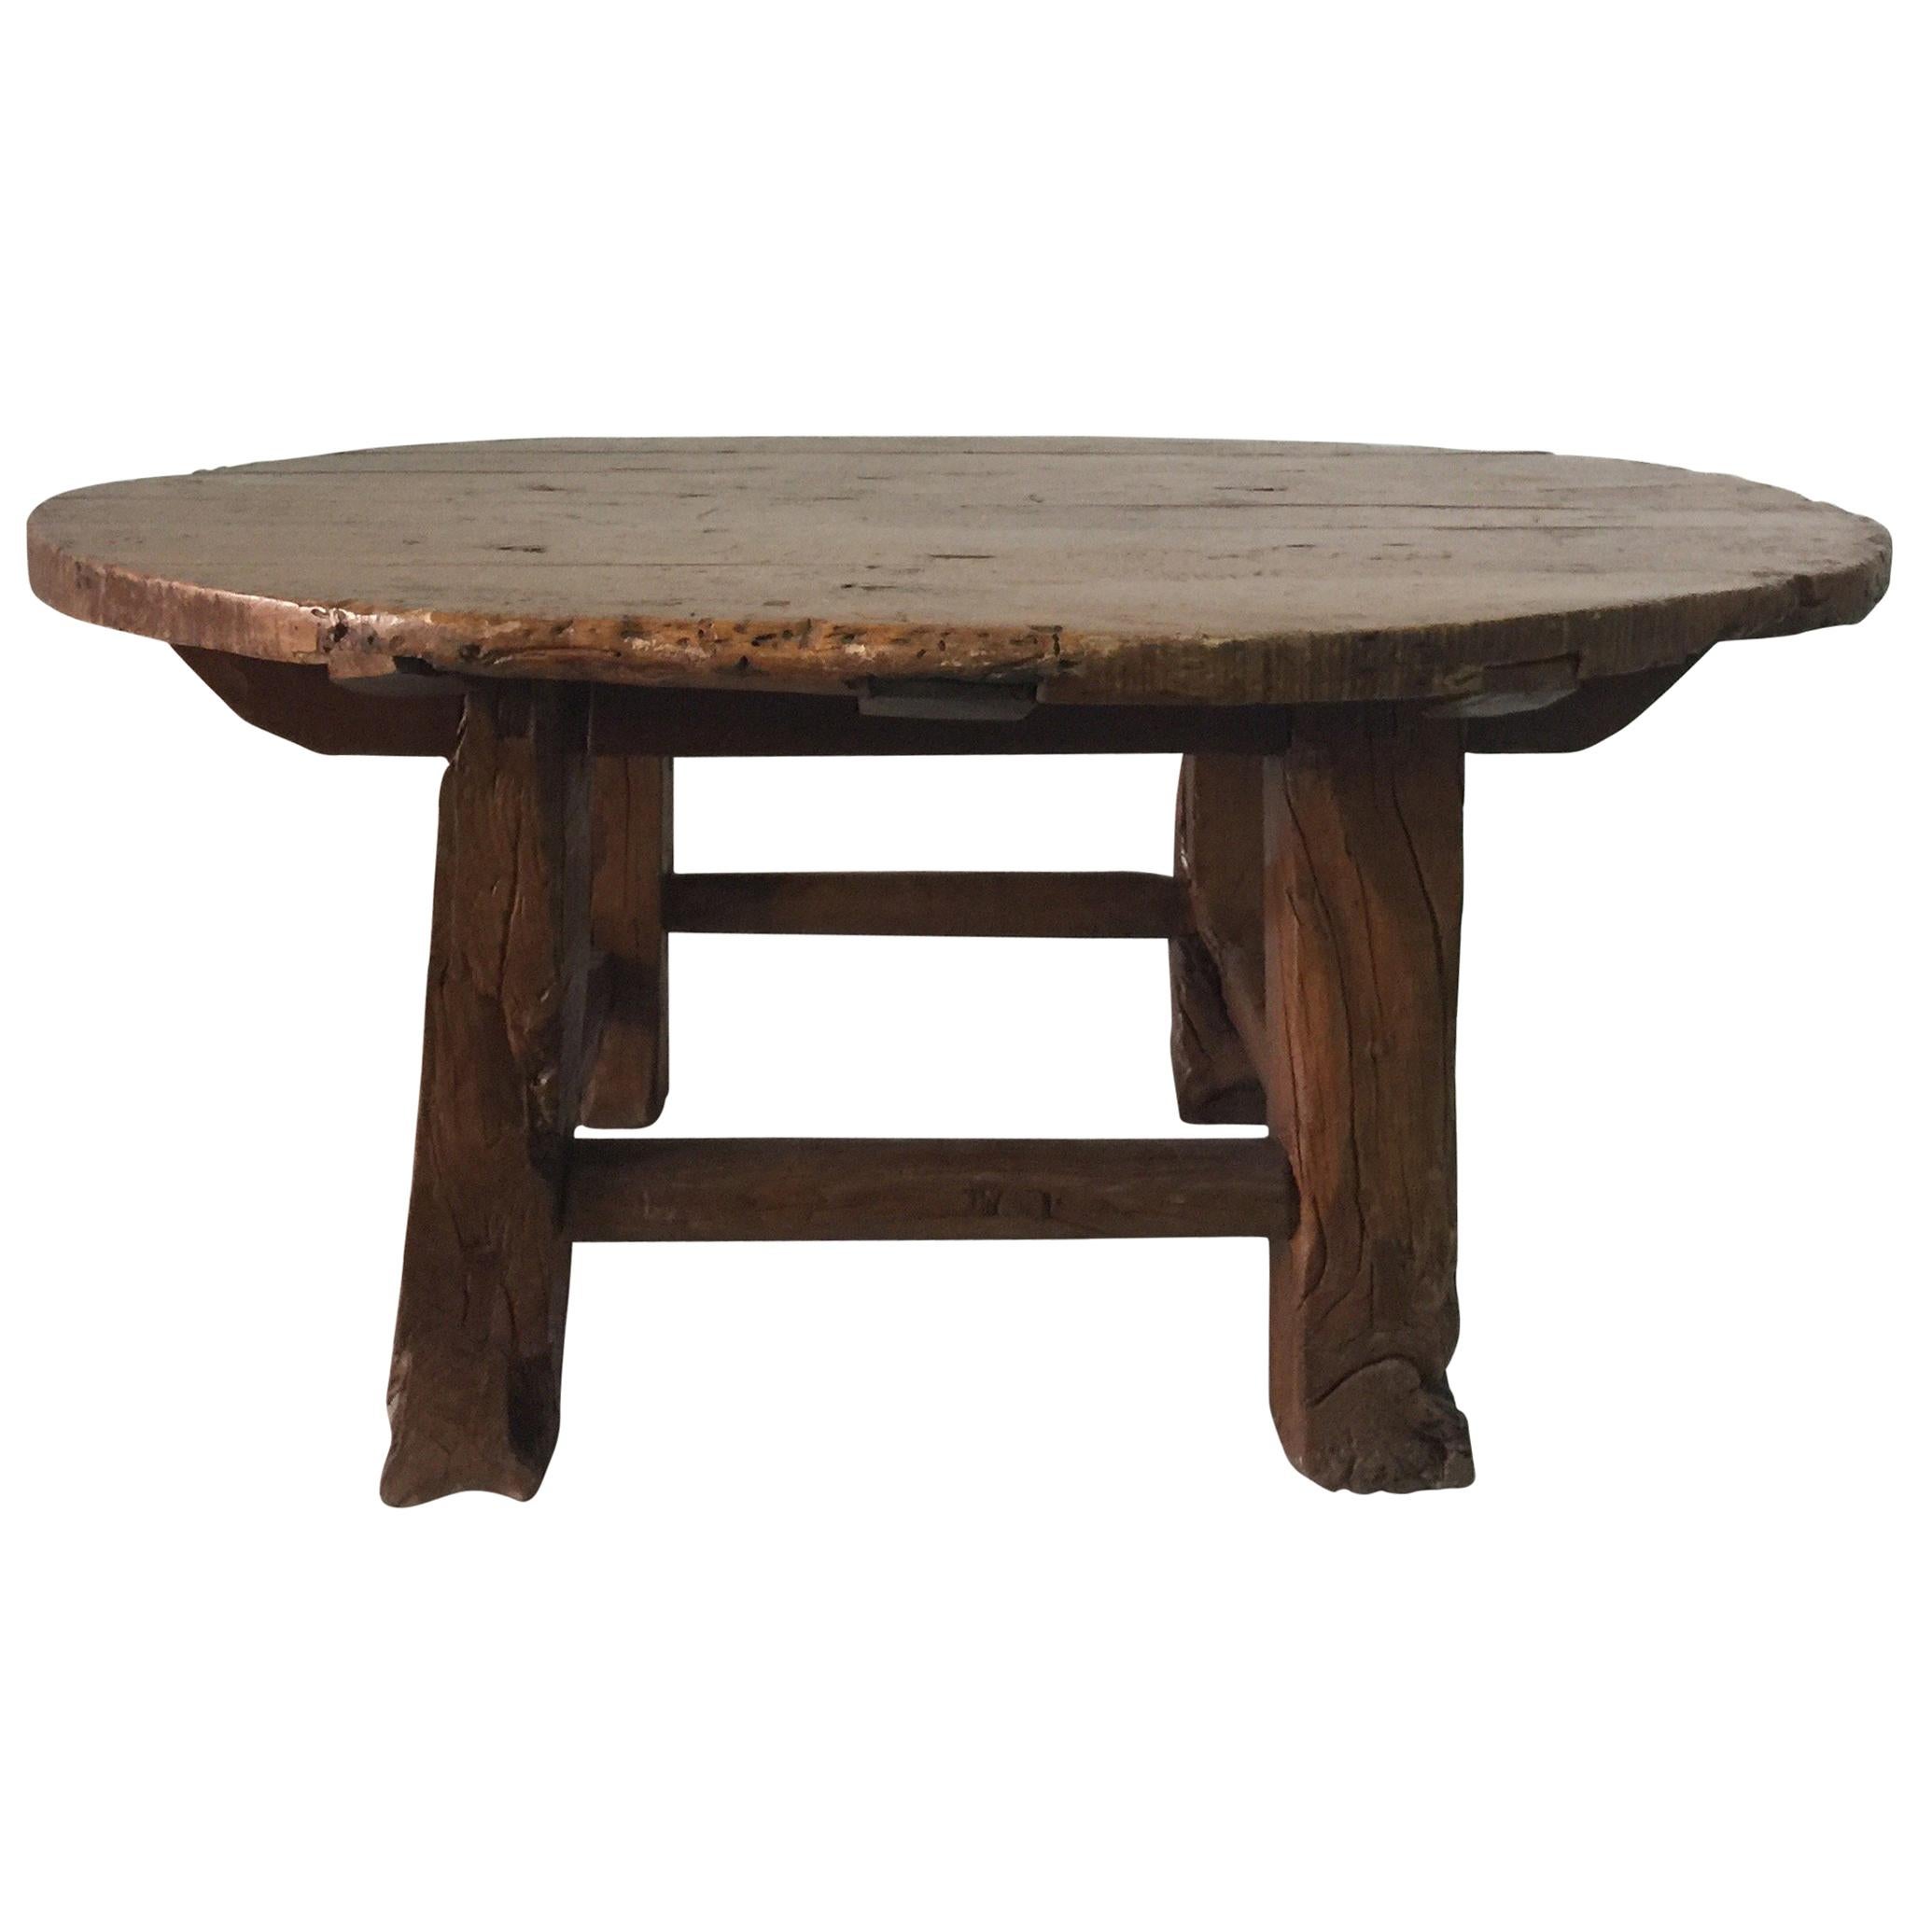 Antique Chinese Huanghuali Hardwood Round Table 